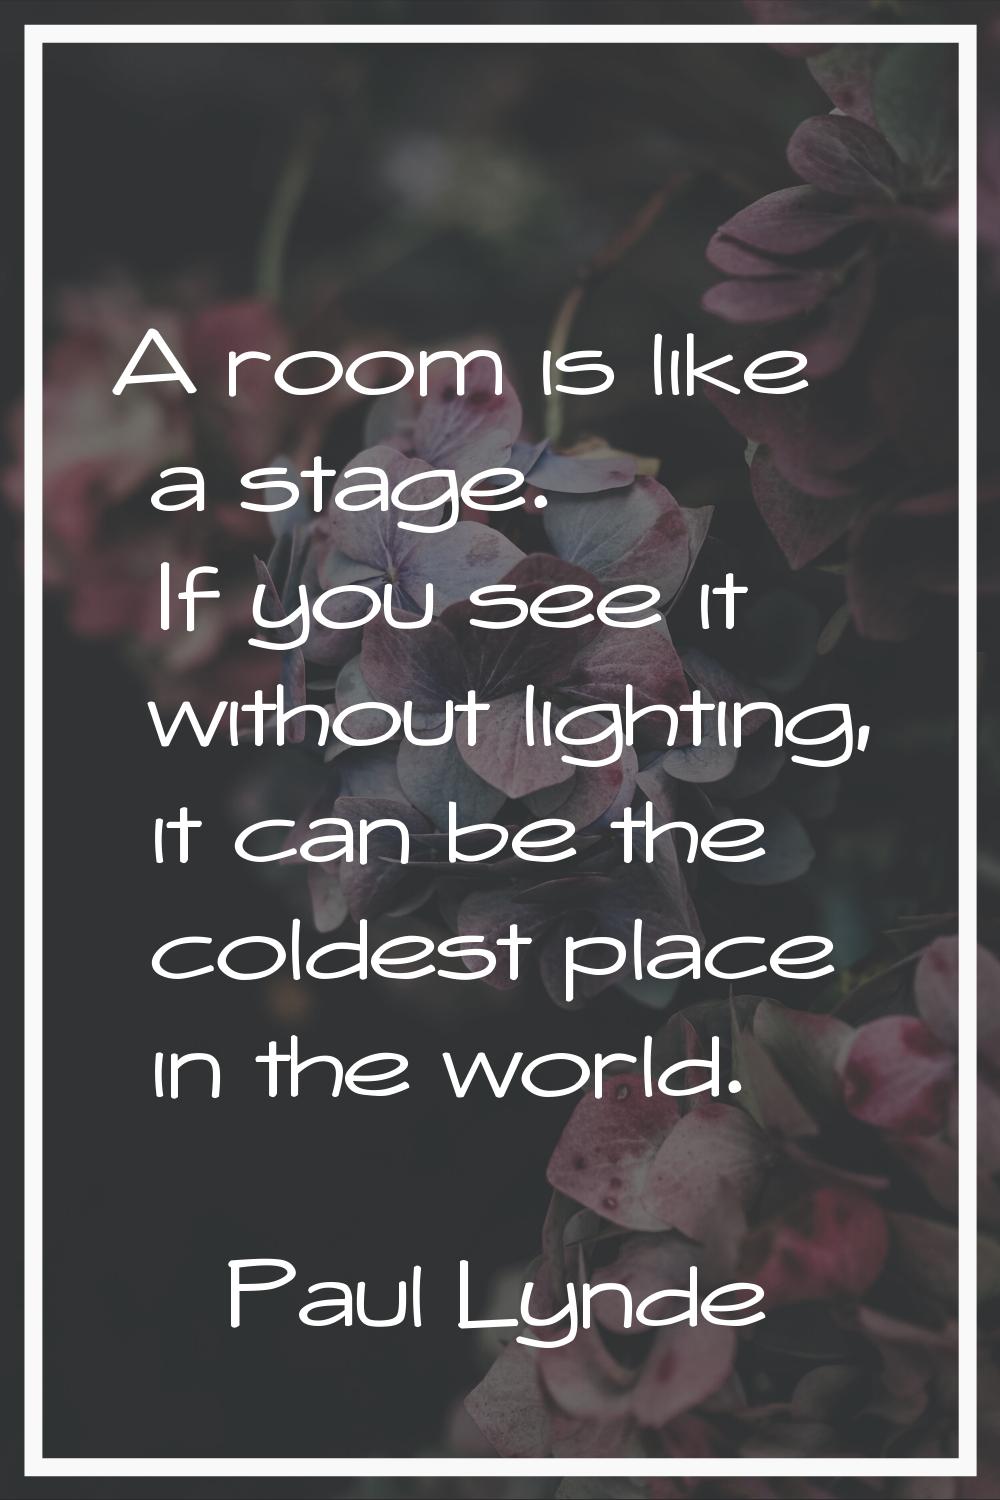 A room is like a stage. If you see it without lighting, it can be the coldest place in the world.